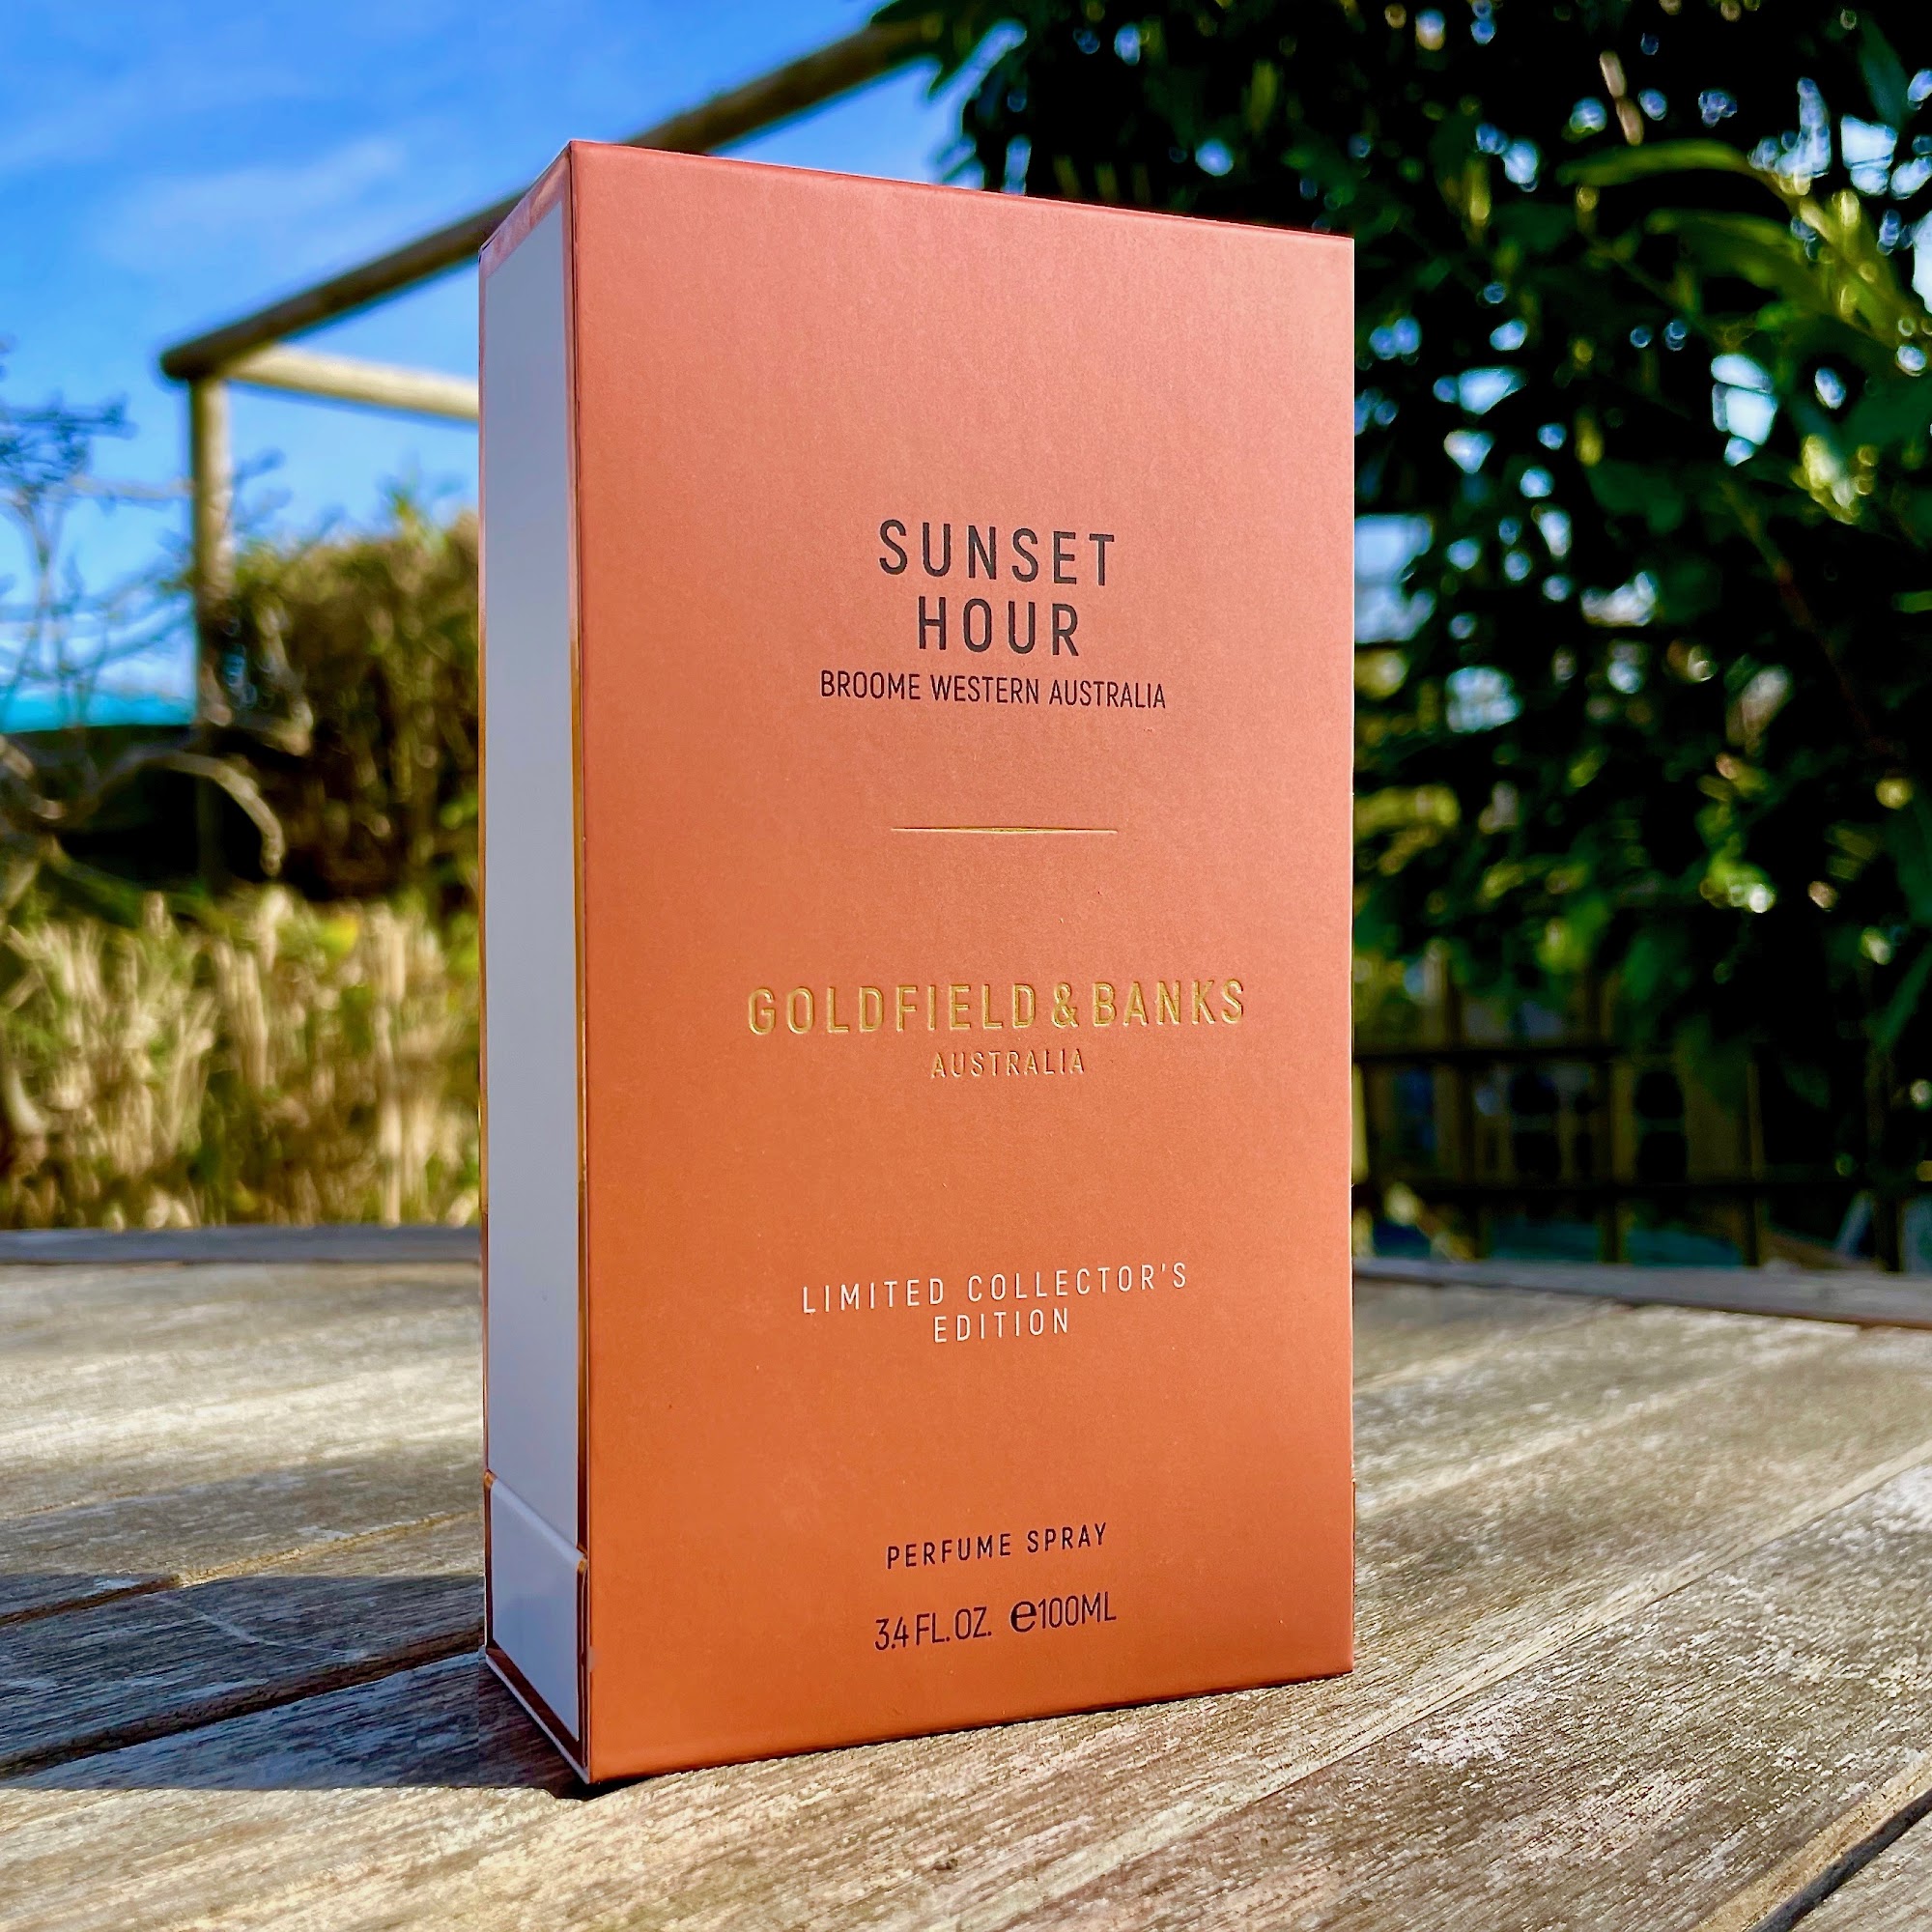 The box of Sunset Hour perfume from Goldfield And Banks